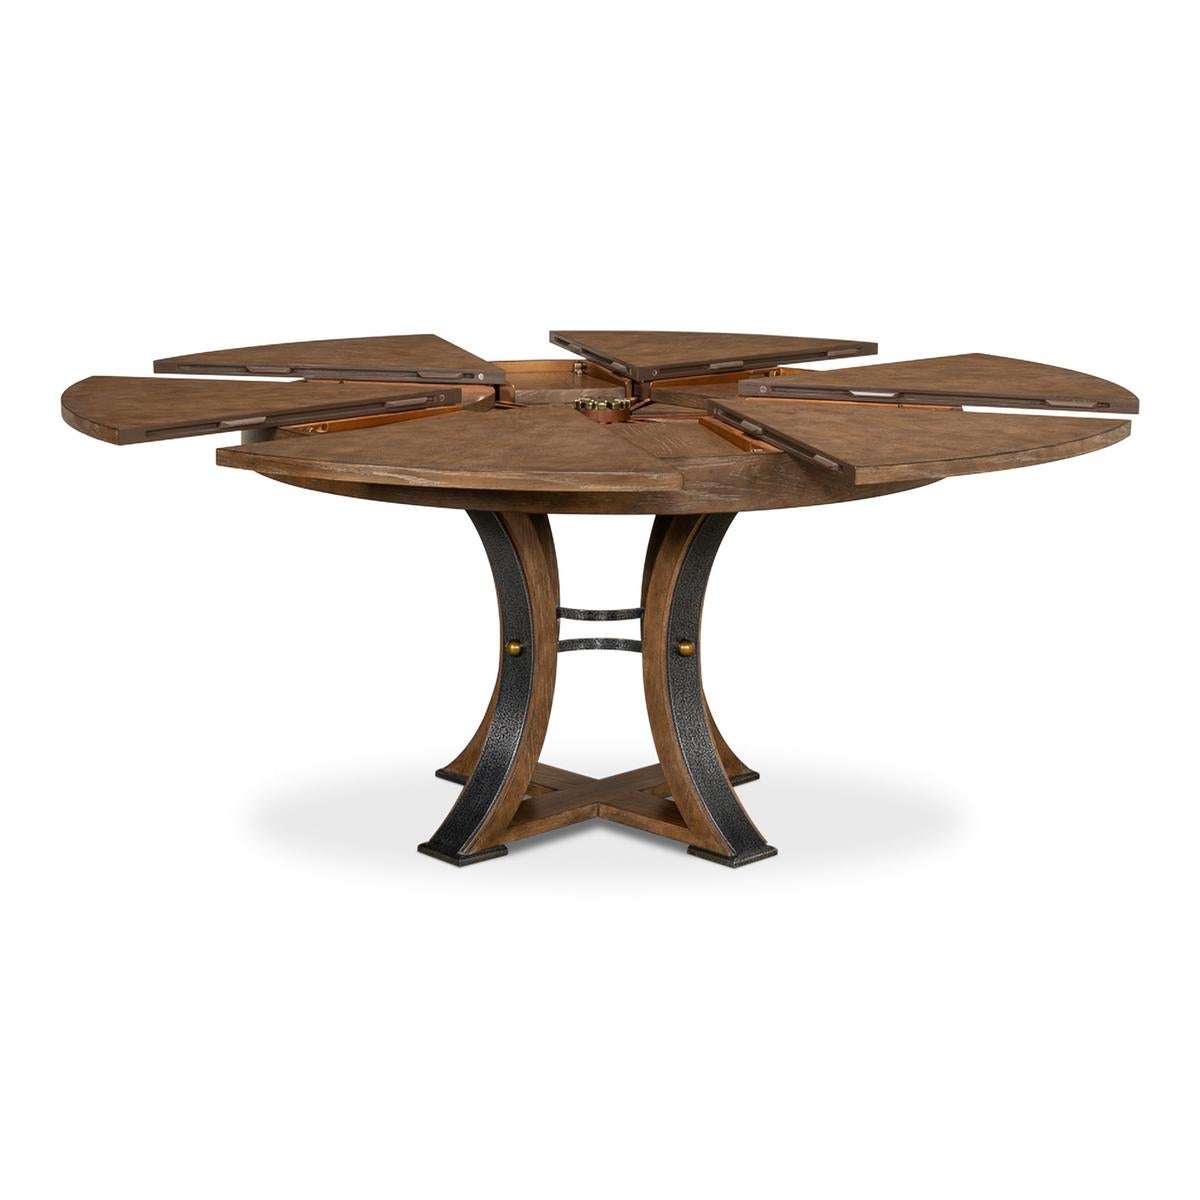 A modern industrial style round extending dining room table. Wire brushed oak top in our Light Mink finish with gunmetal iron accents to the simple geometric form base. The table opens and extends to 70